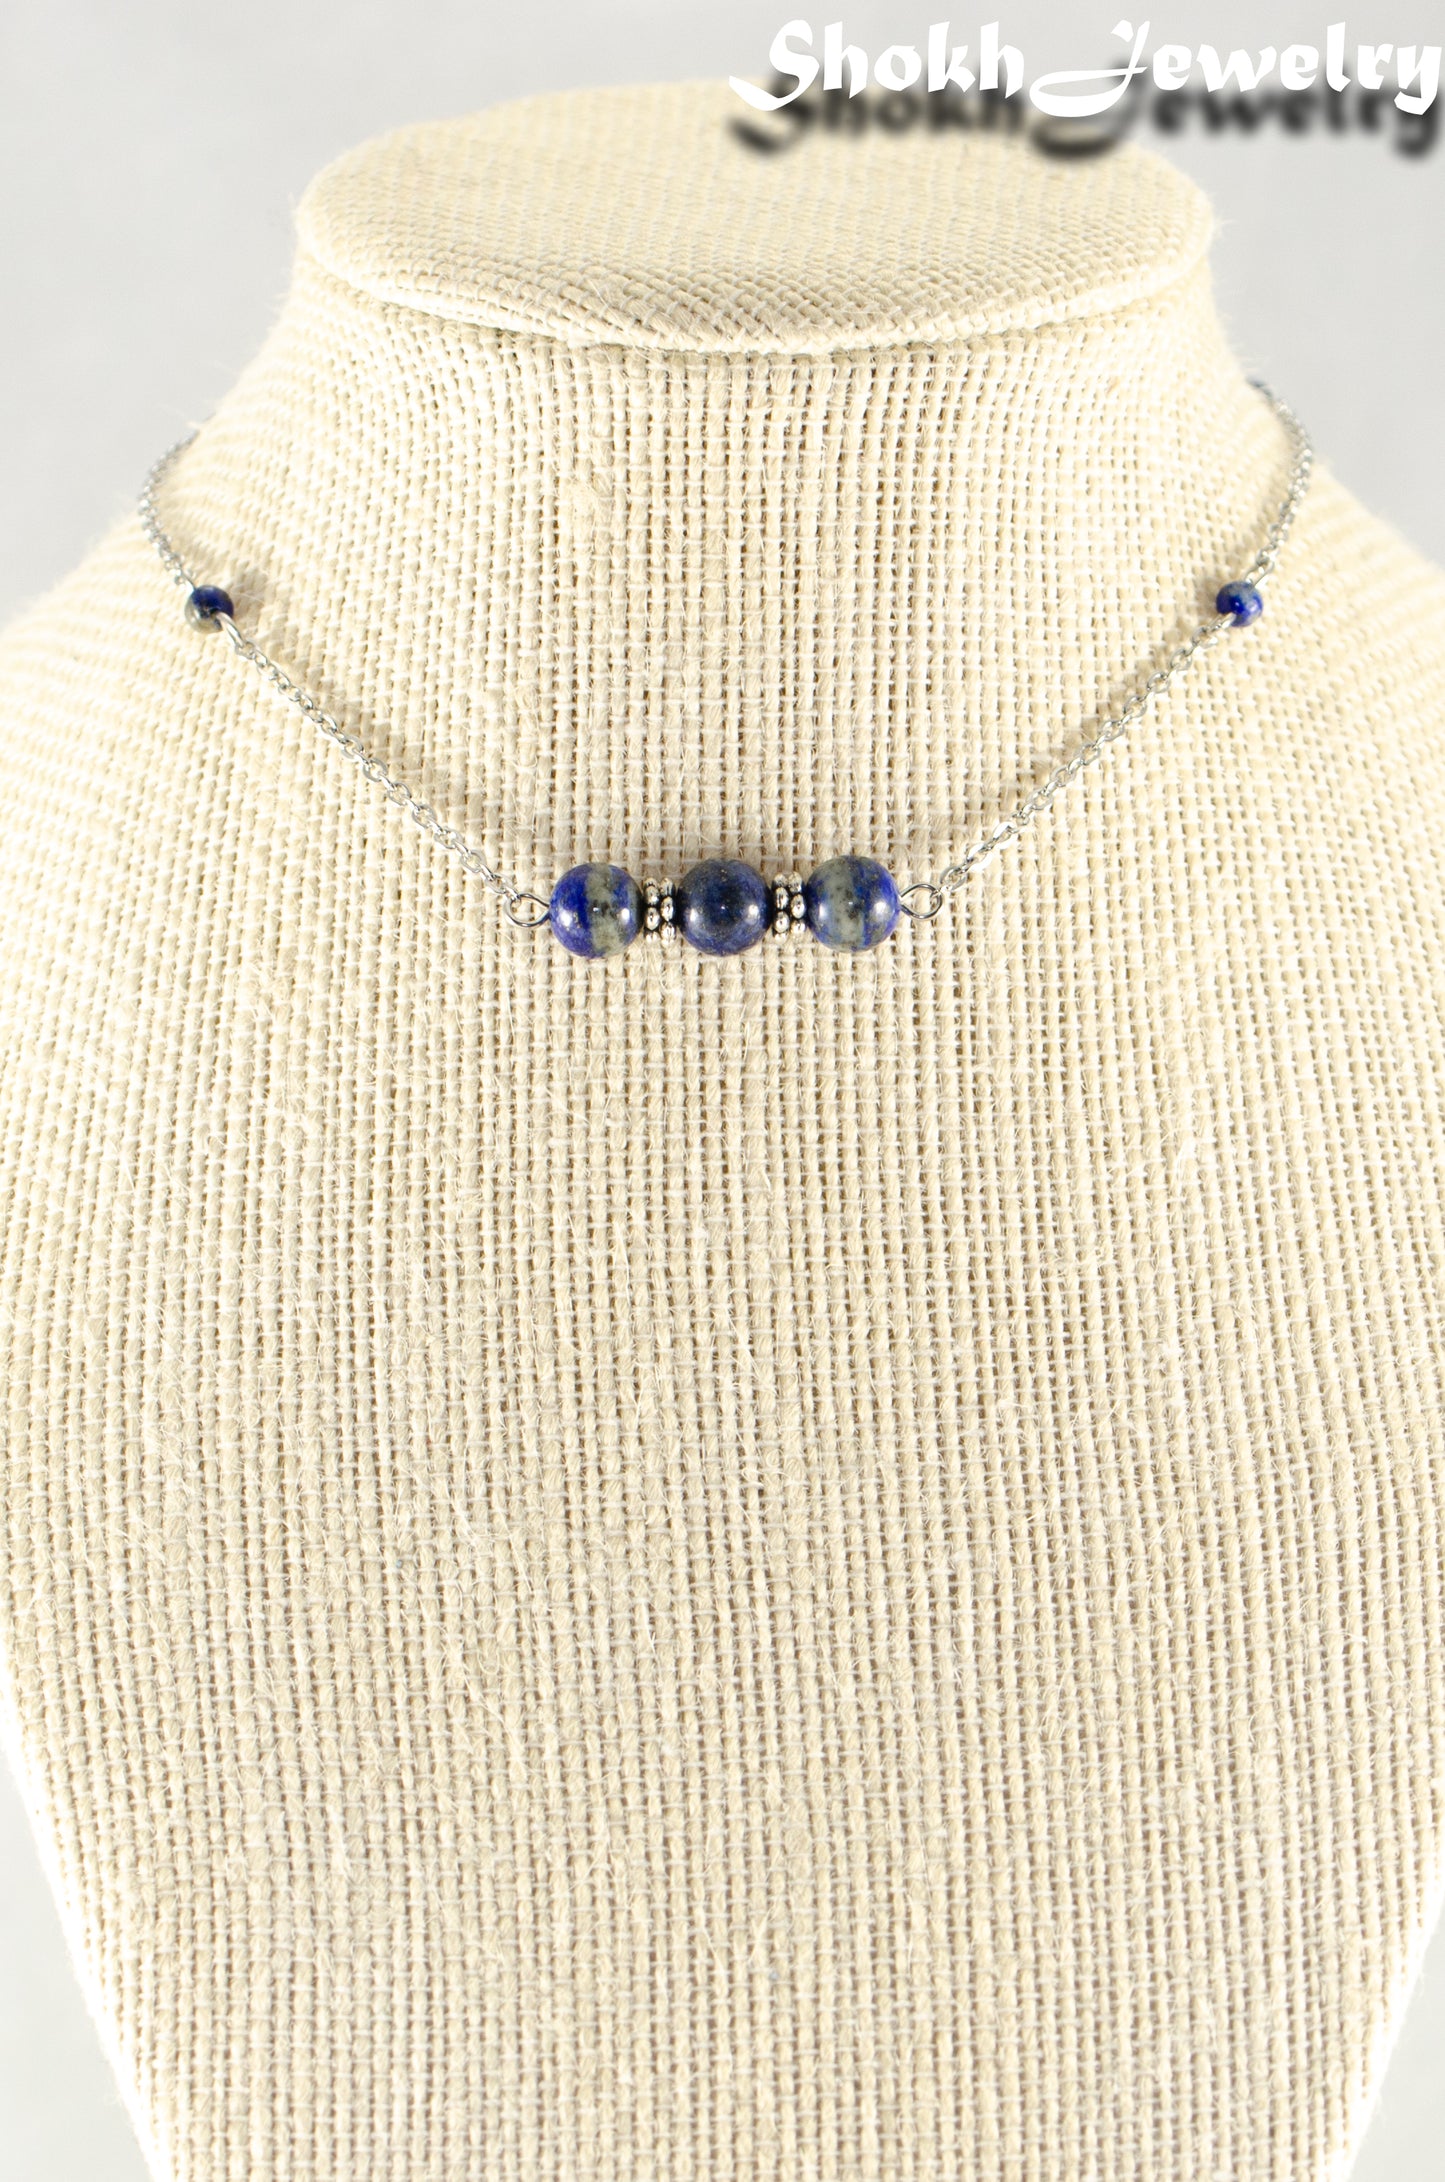 Close up of Natural Lapis Lazuli and Chain Choker Necklace.